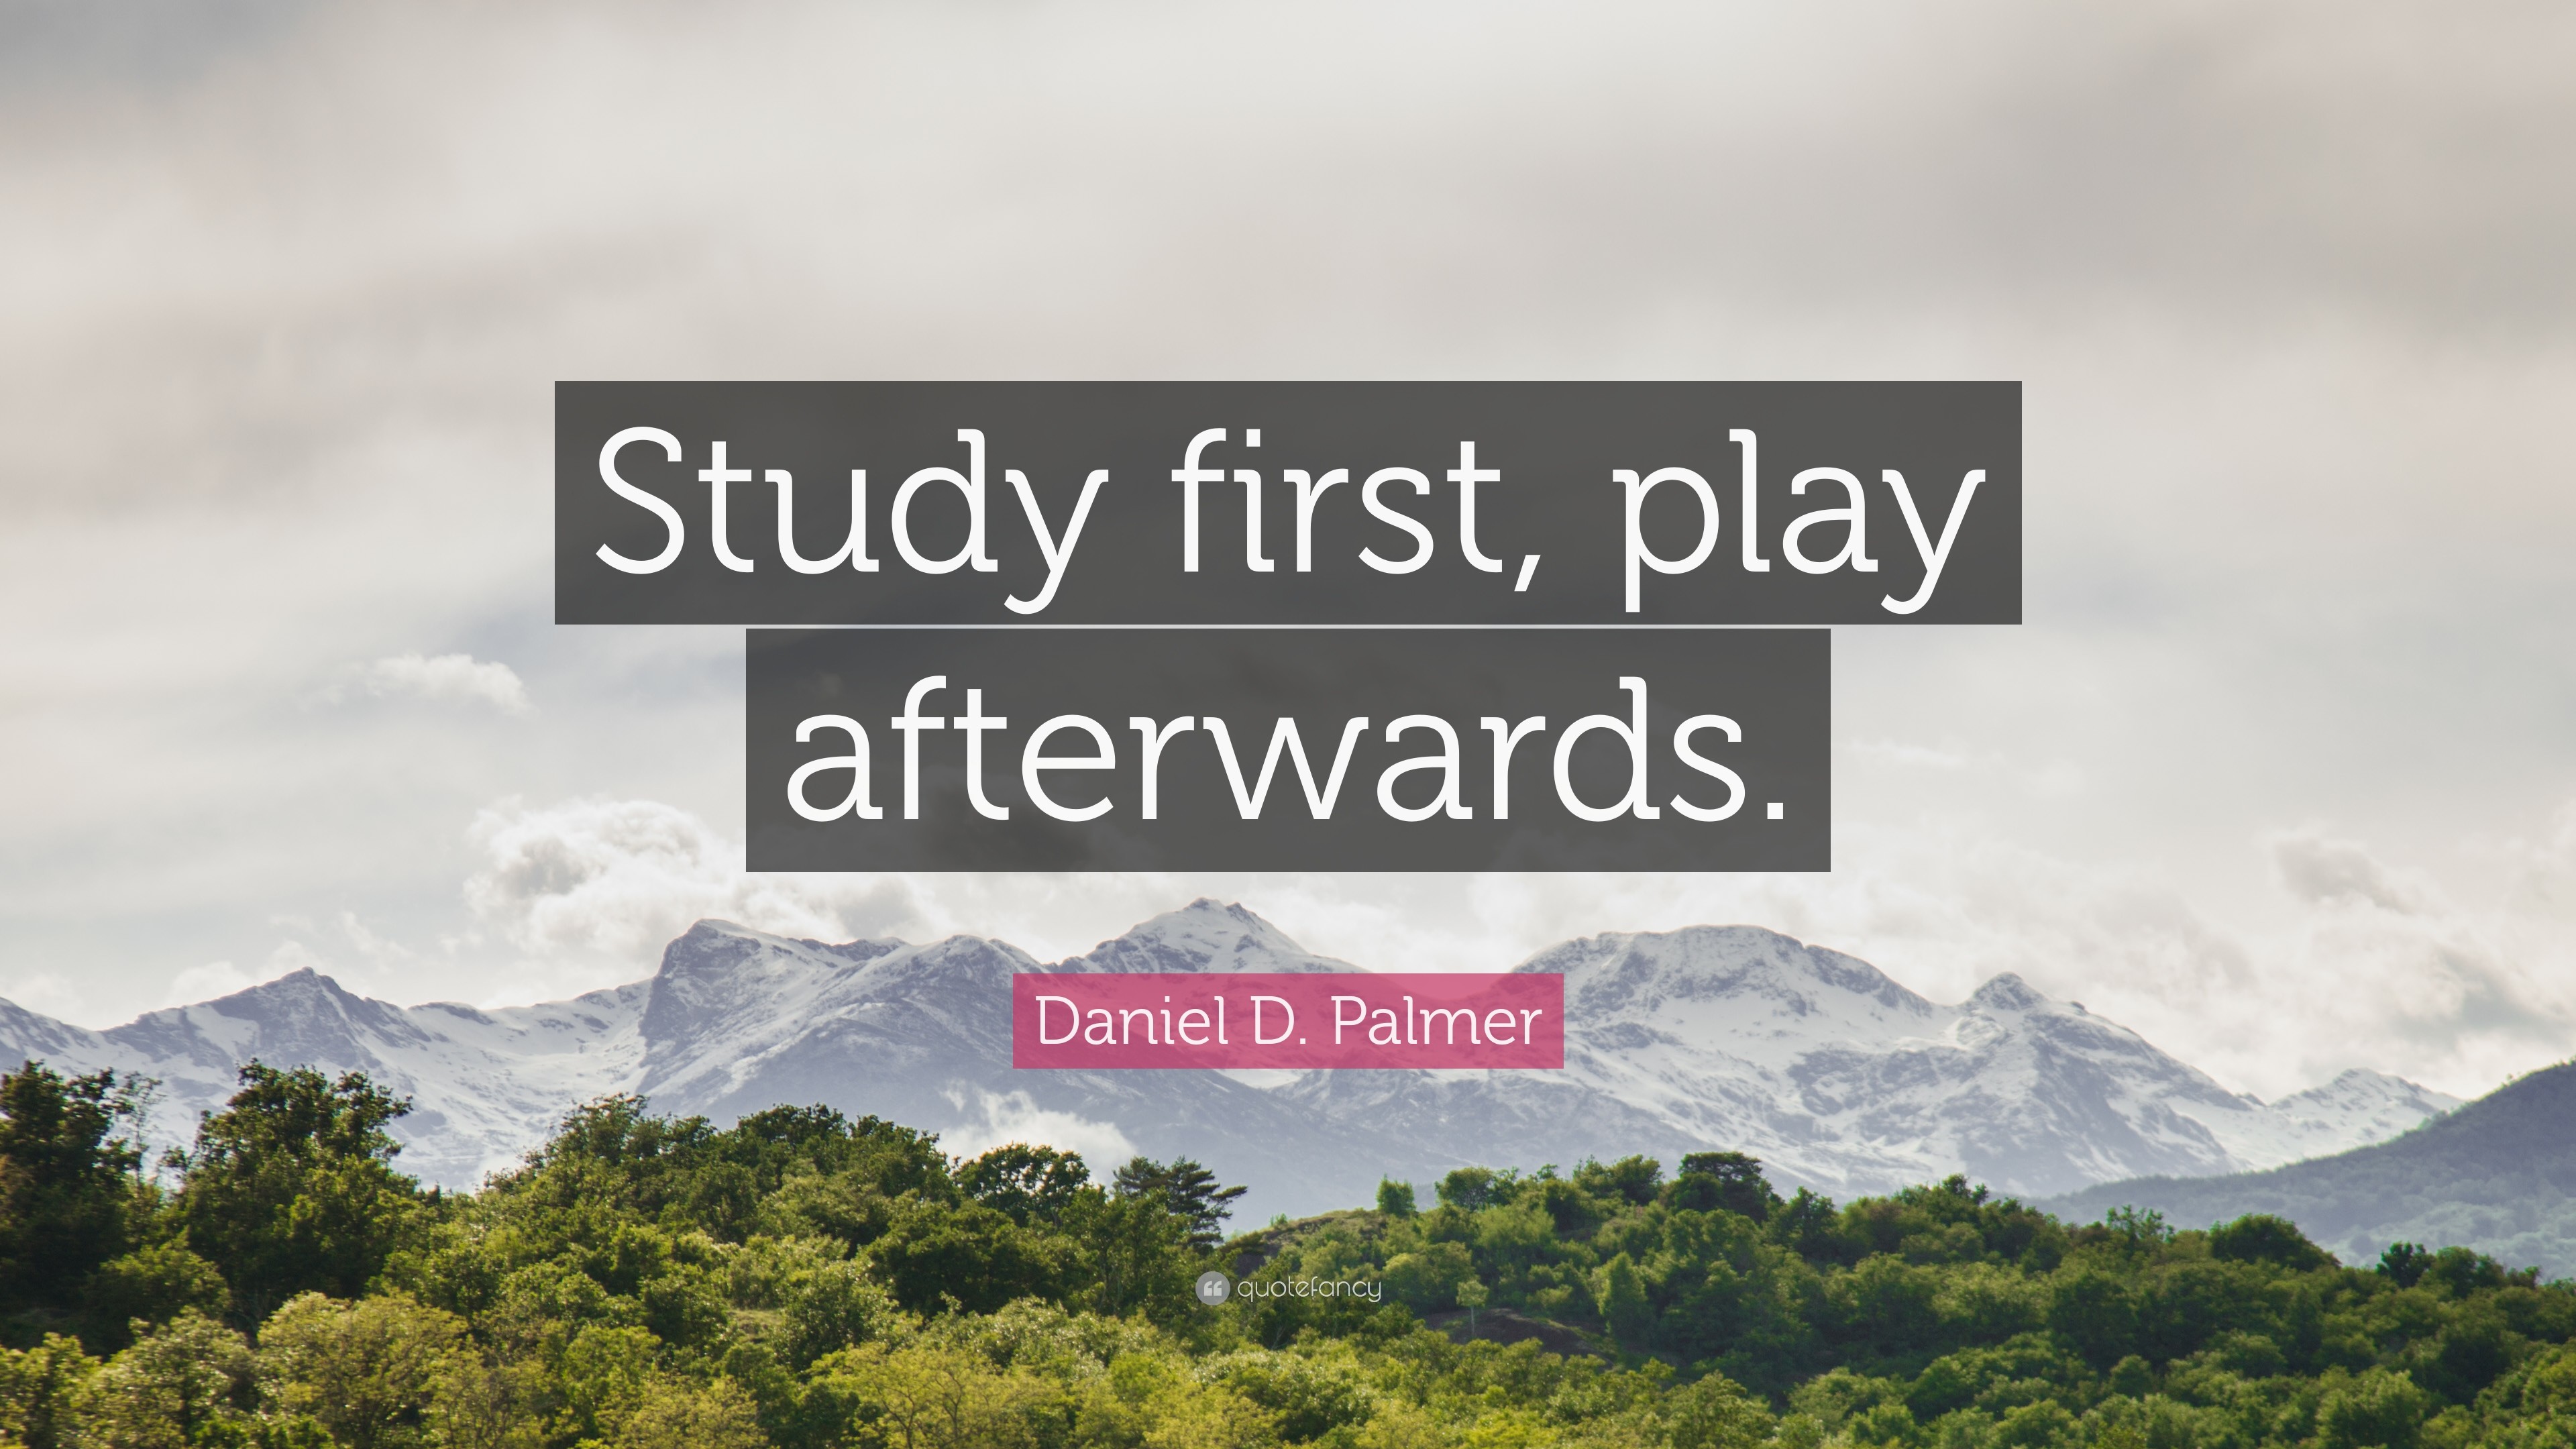 3840x2160 Study Quotes: “Study first, play afterwards.” — Daniel D. Palmer